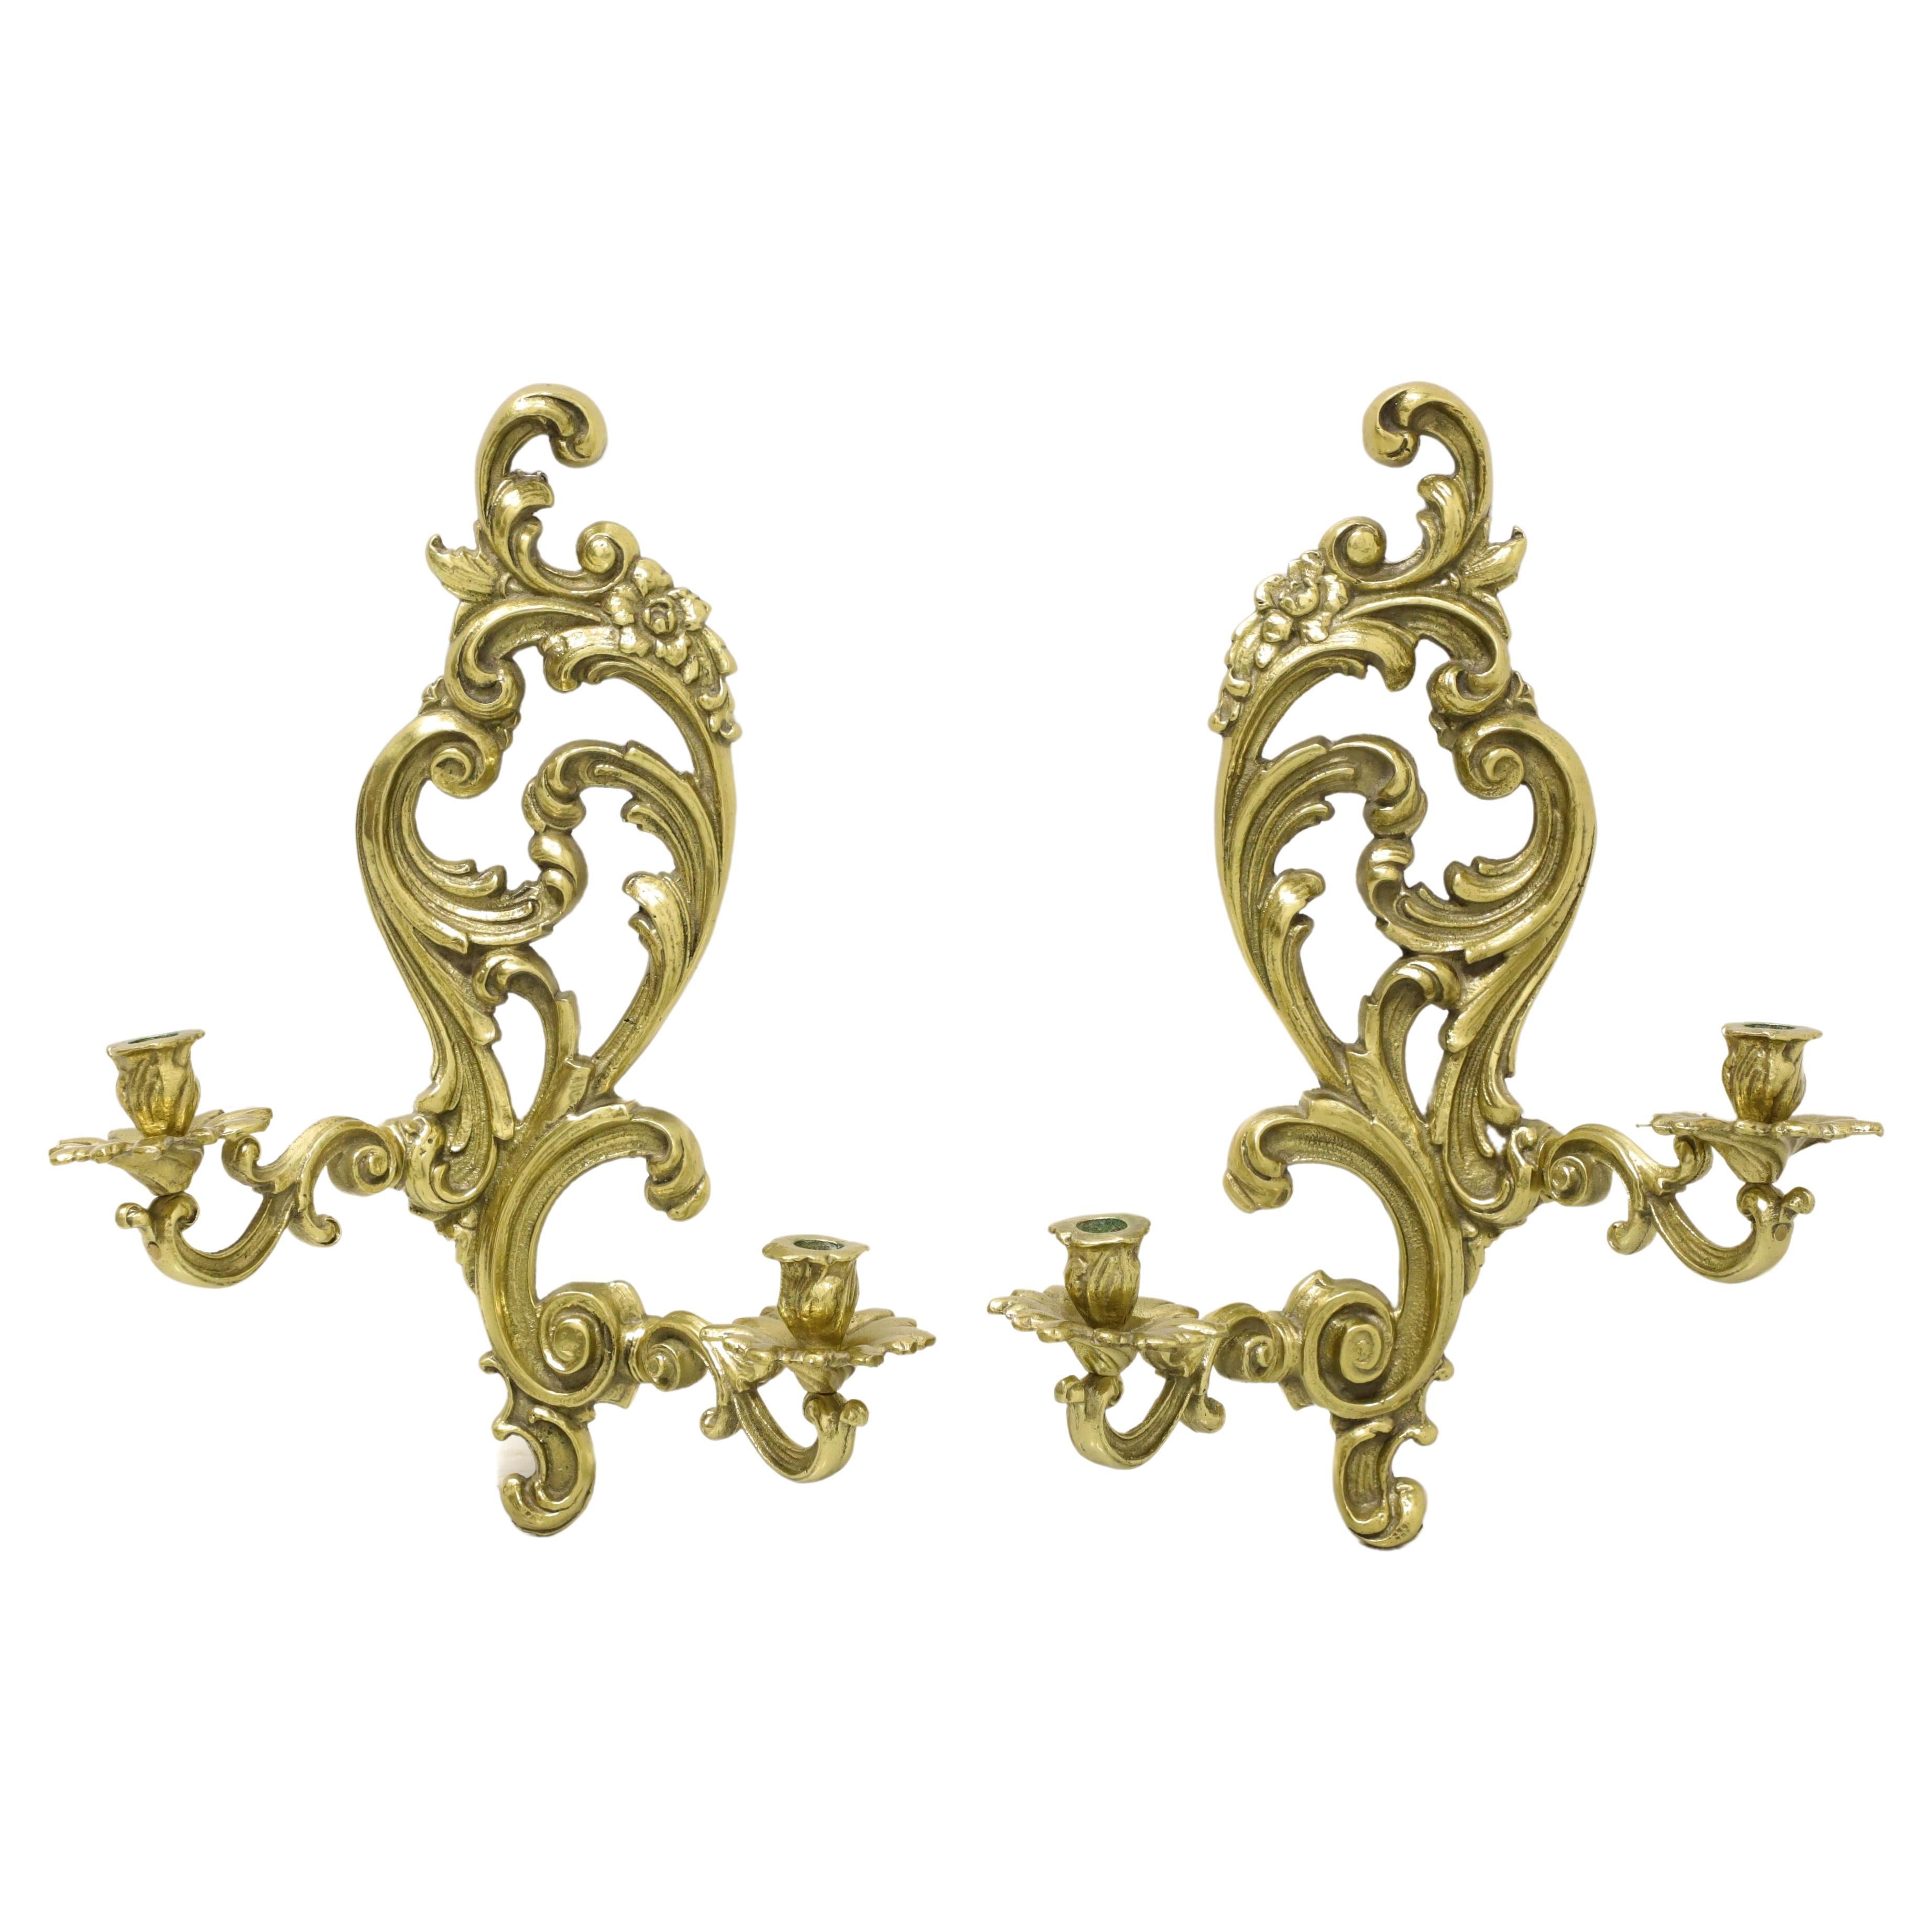 Antique 1920's Solid Brass Rococo Style Candle Wall Sconces - Pair For Sale